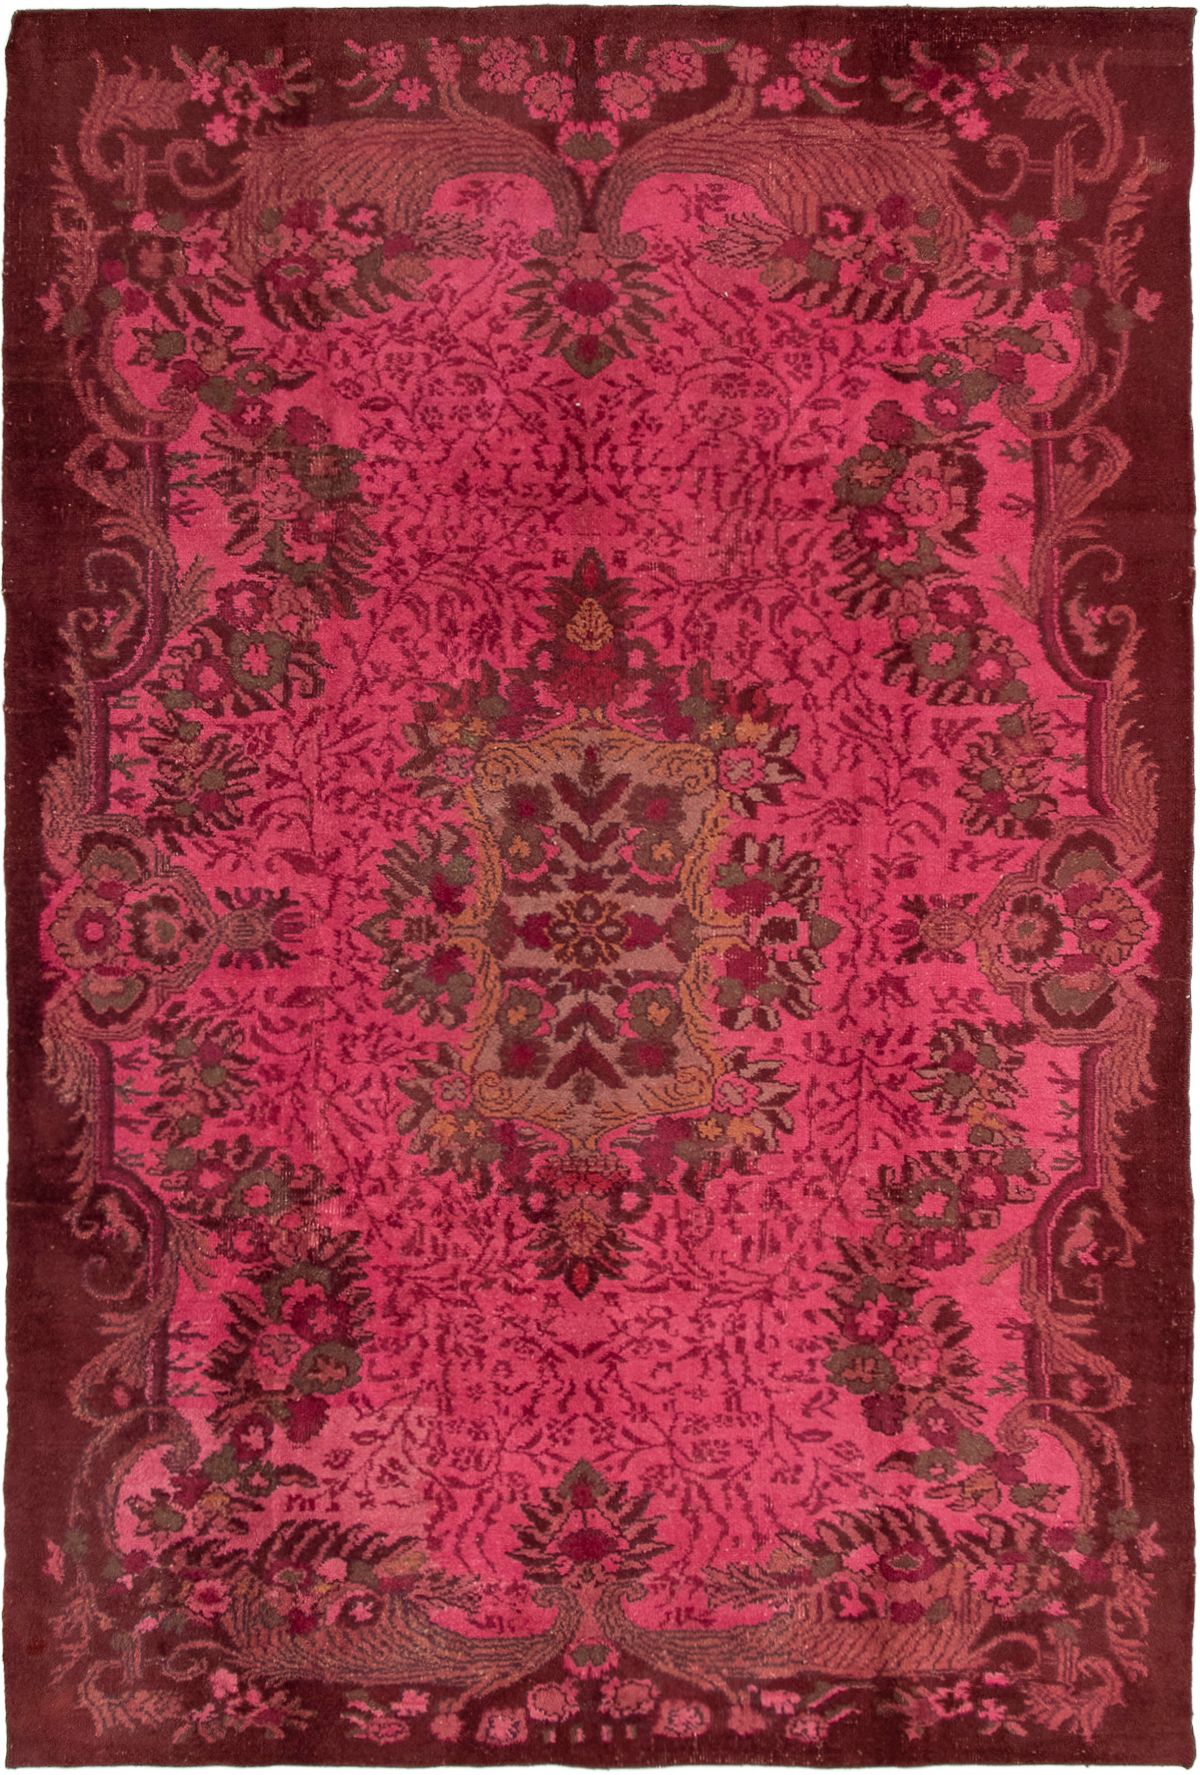 Hand-knotted Color Transition Dark Pink Wool Rug 6'4" x 9'9" Size: 6'4" x 9'9"  